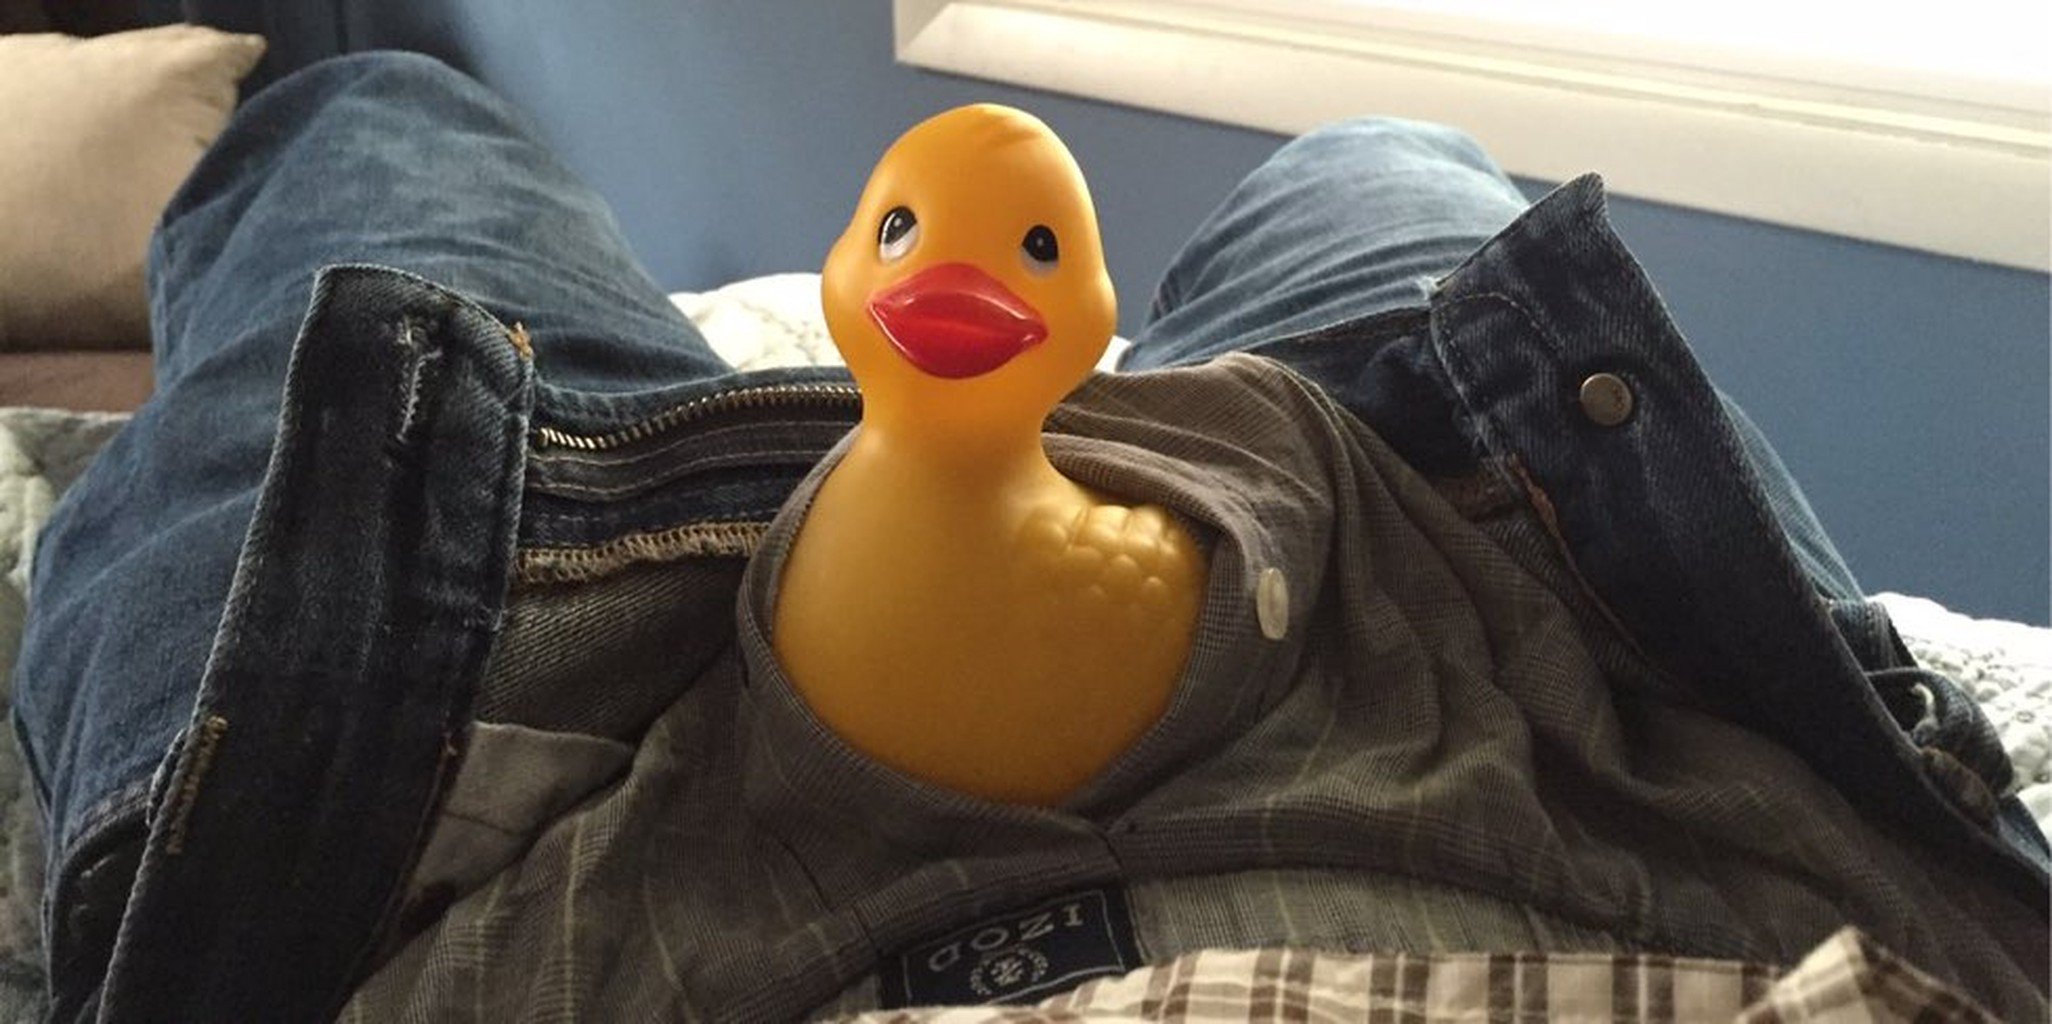 Facebook Bans Photo of Rubber Duck in Pants Over 'Nudity'. 